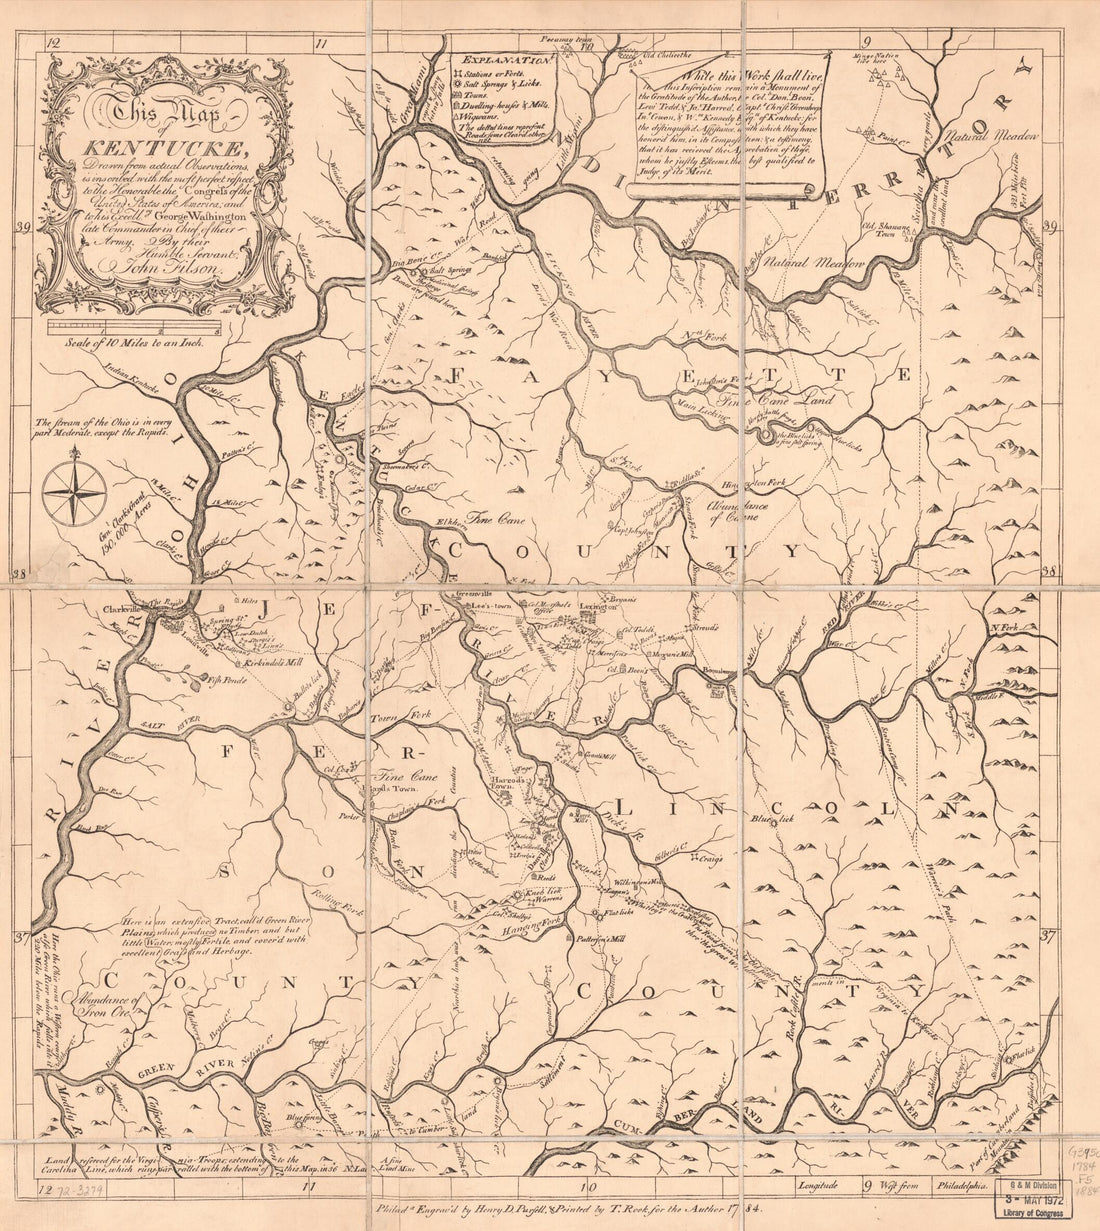 This old map of This Map of Kentucke, Drawn from Actual Observations Is Inscribed With the Most Perfect Respect to the Honorable the Congress of the United States of America, and to His Excellcy. George Washington, Late Commander In Chief of Their Army f